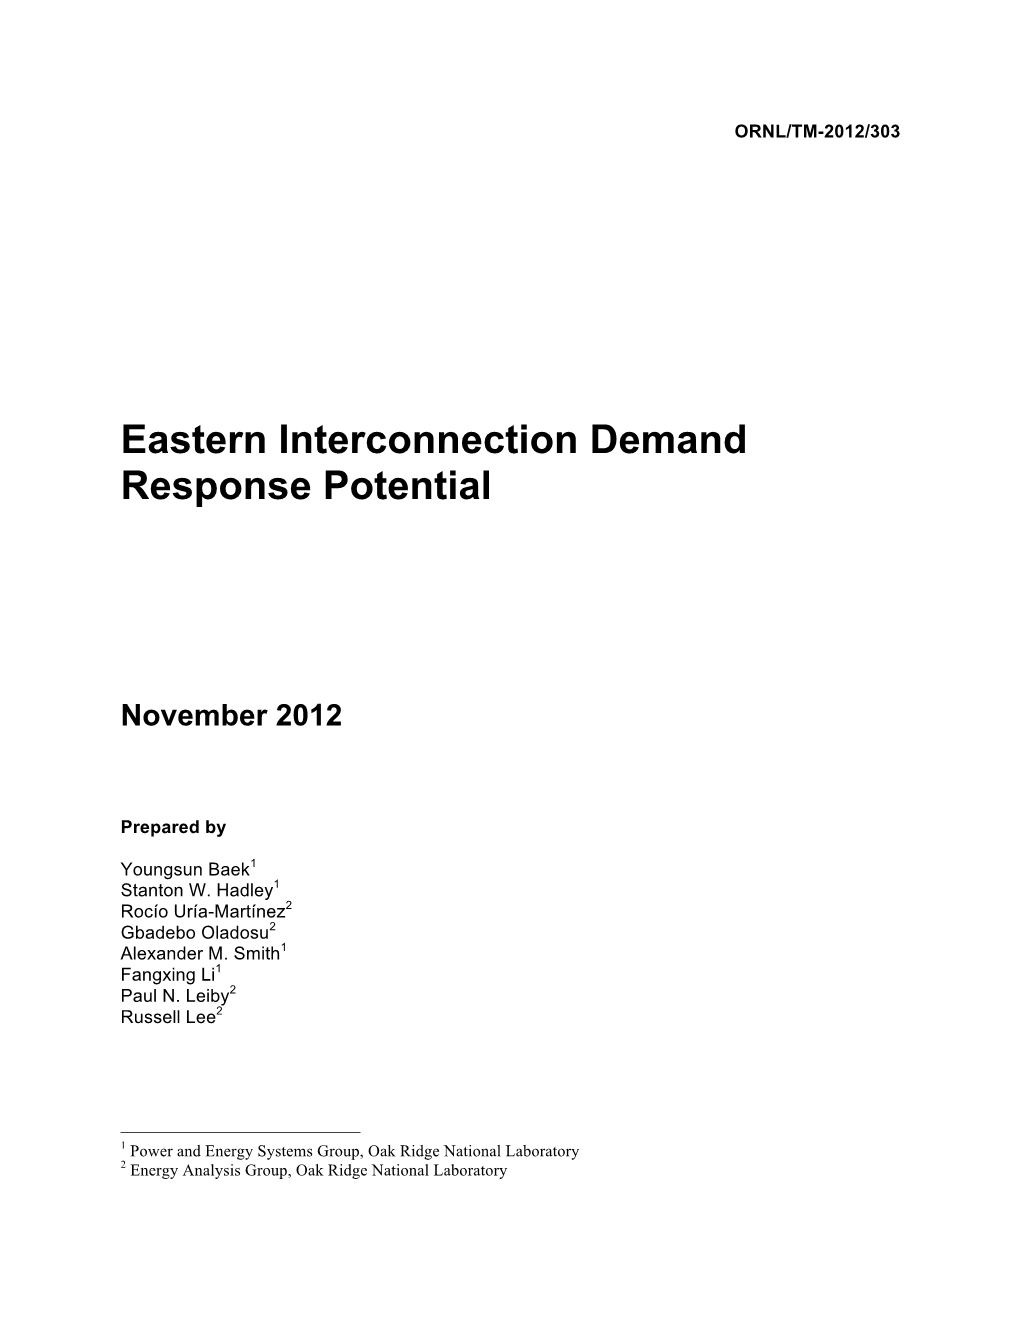 Eastern Interconnection Demand Response Potential